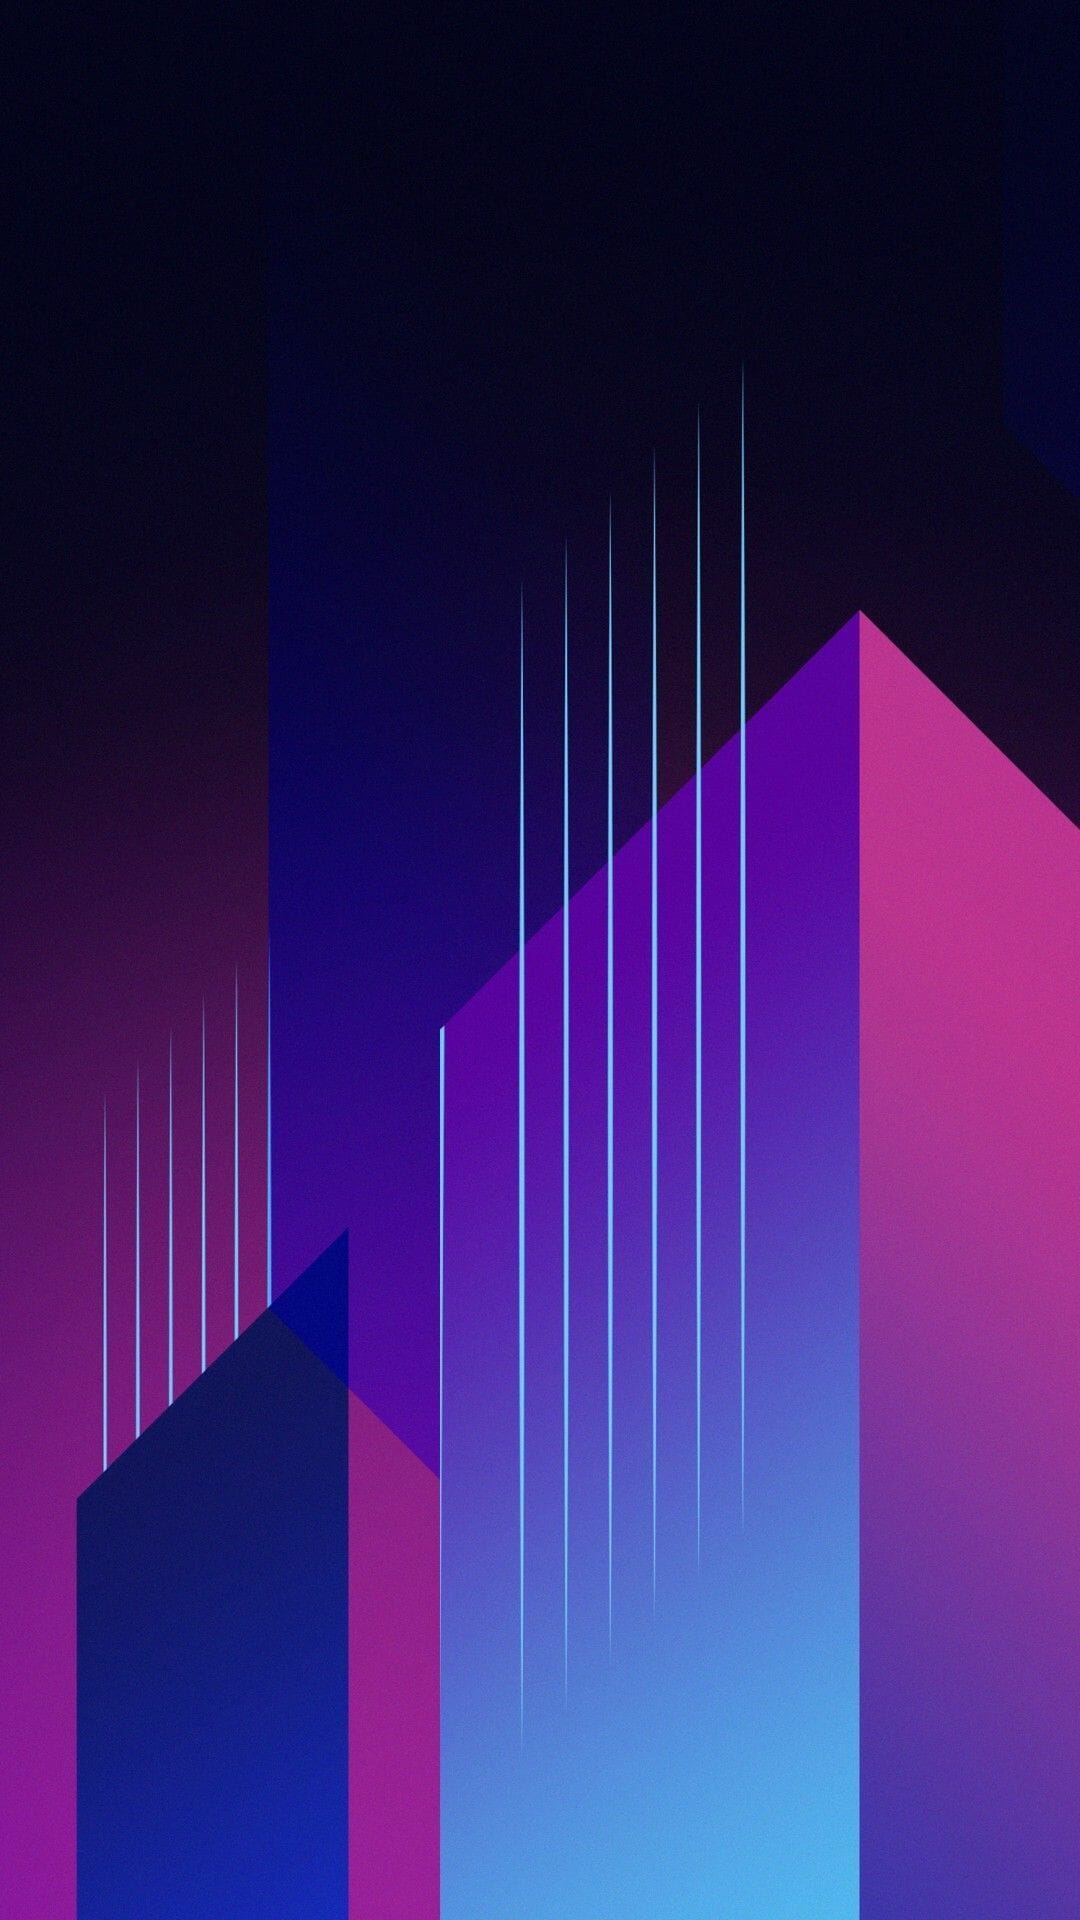 Aesthetic colors, 1080x1920. Background. Qhd wallpaper